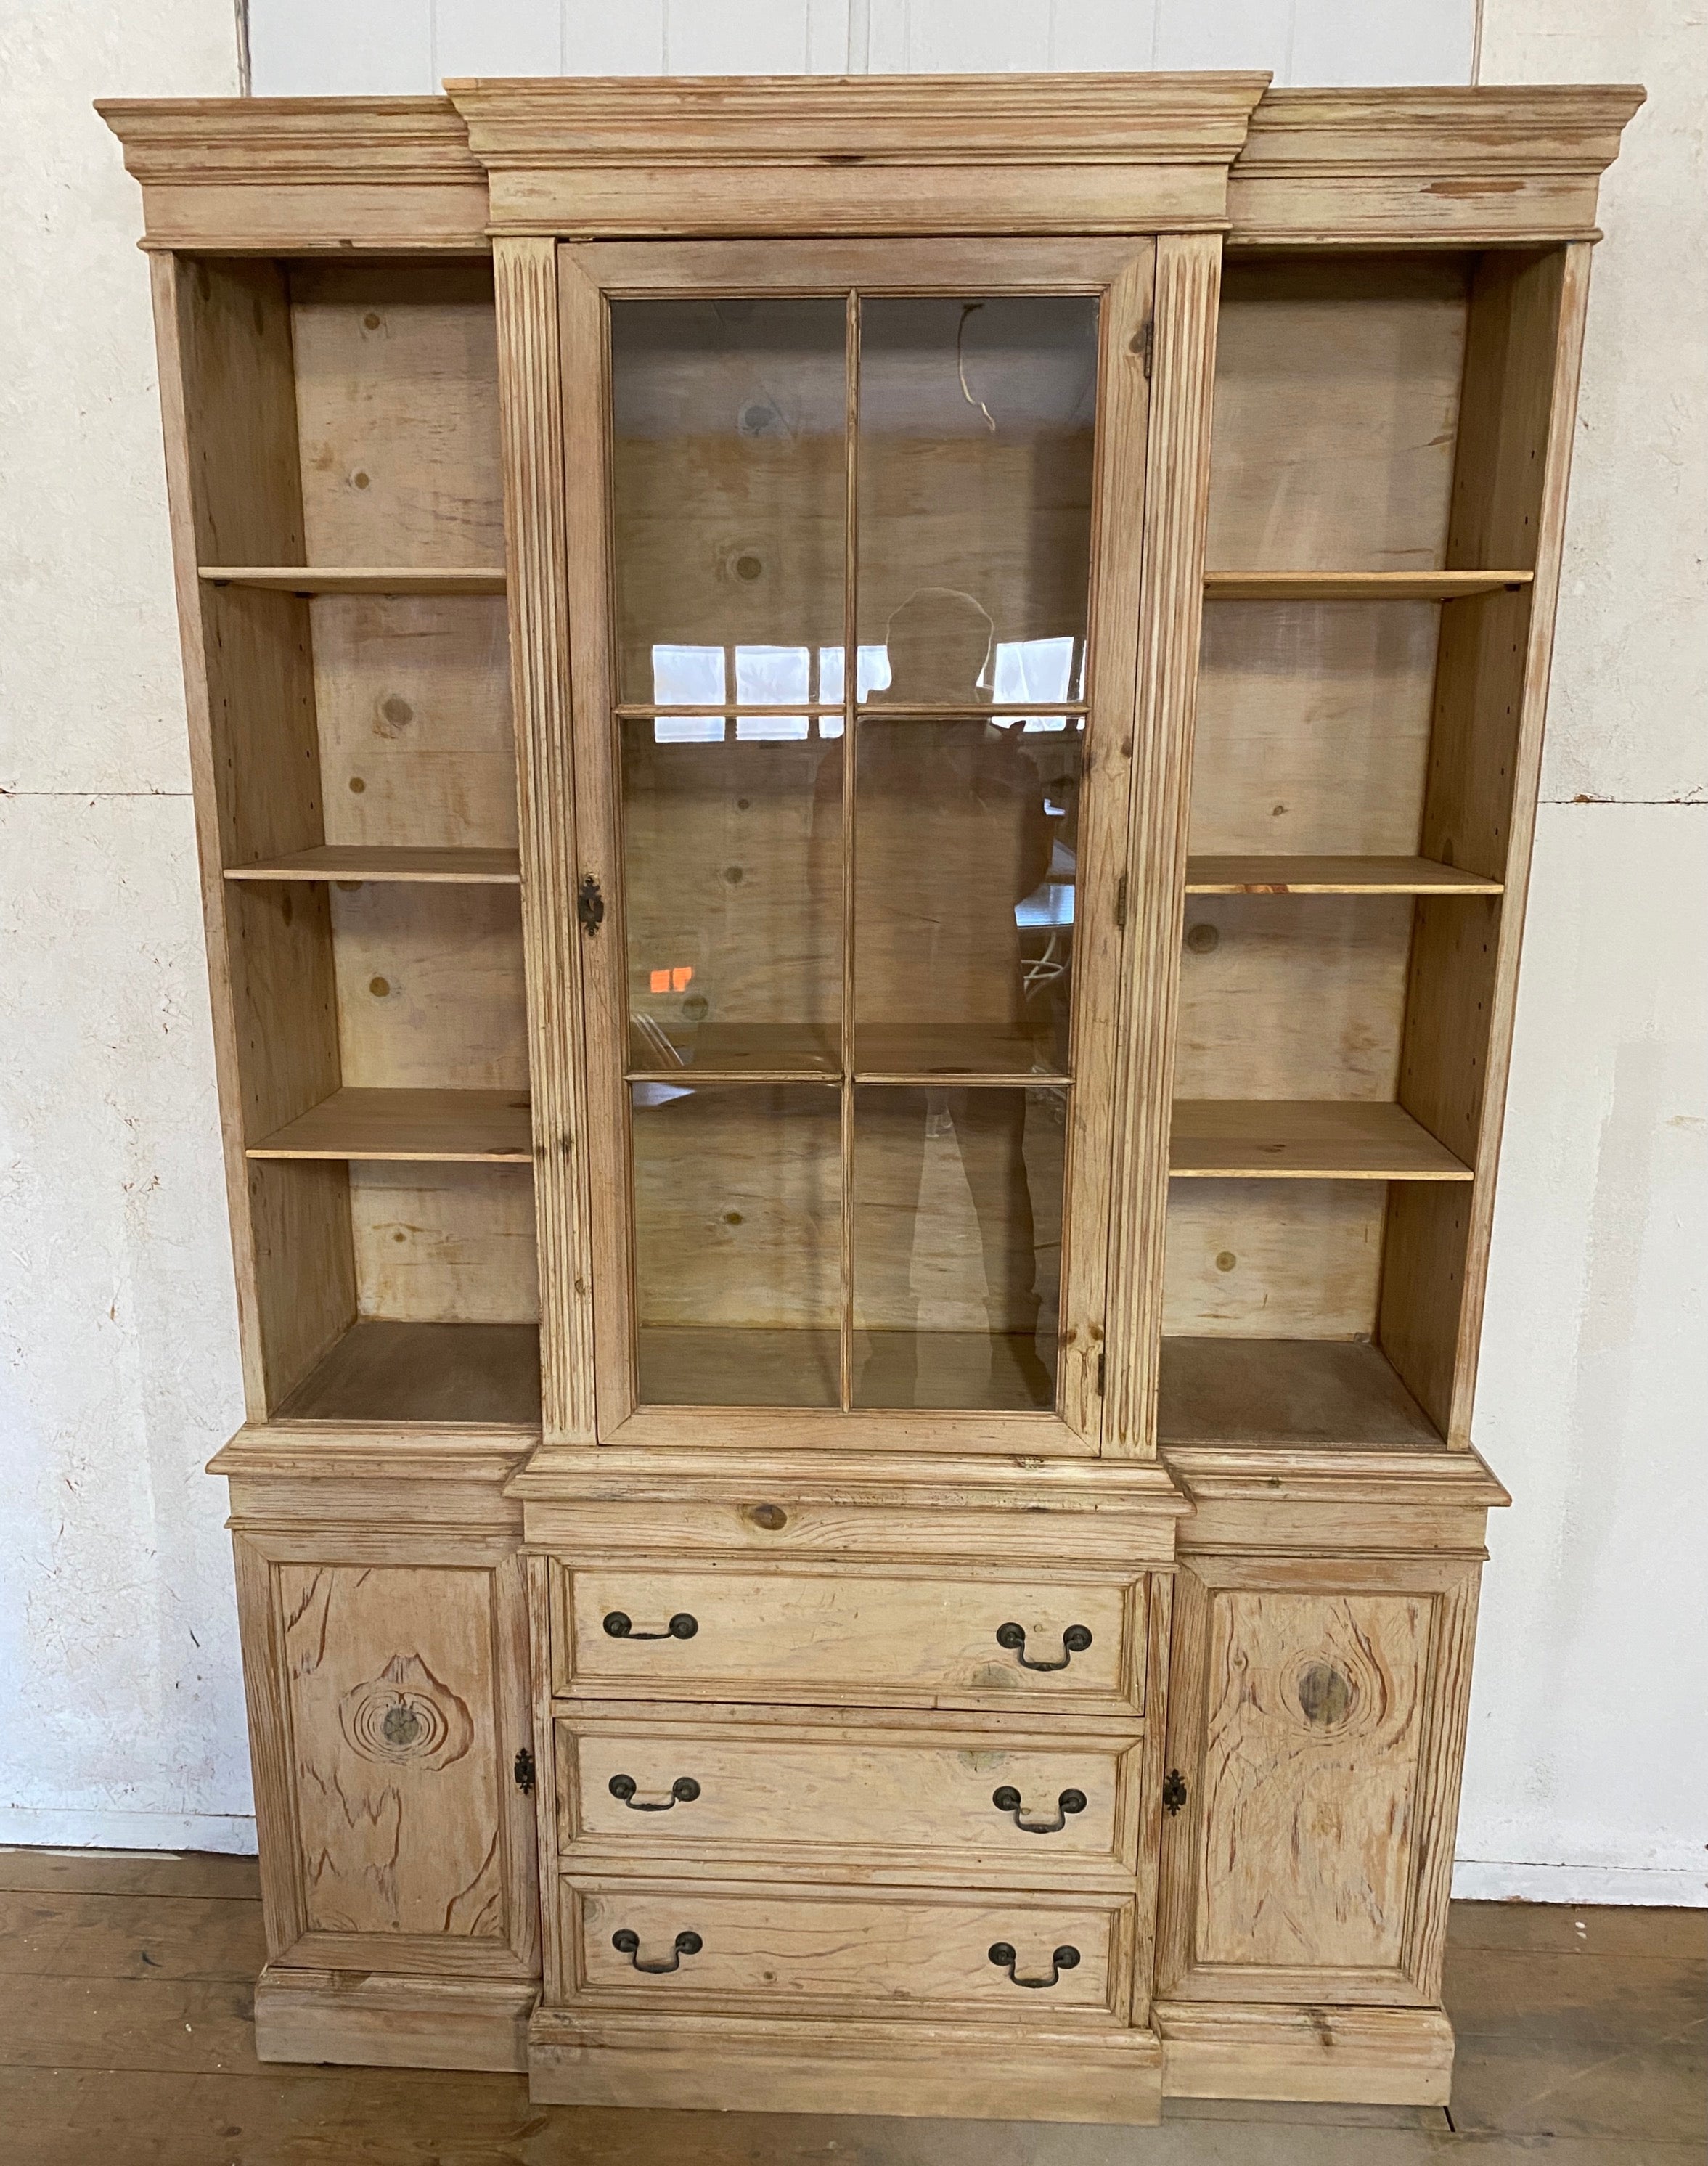 English Sheraton style 19th century country pine breakfront bookcase cabinet with lattice center doors and open sides shelves. The one piece construction classic country farmhouse style antique pine cupboard has wonderful aged patina with plenty of